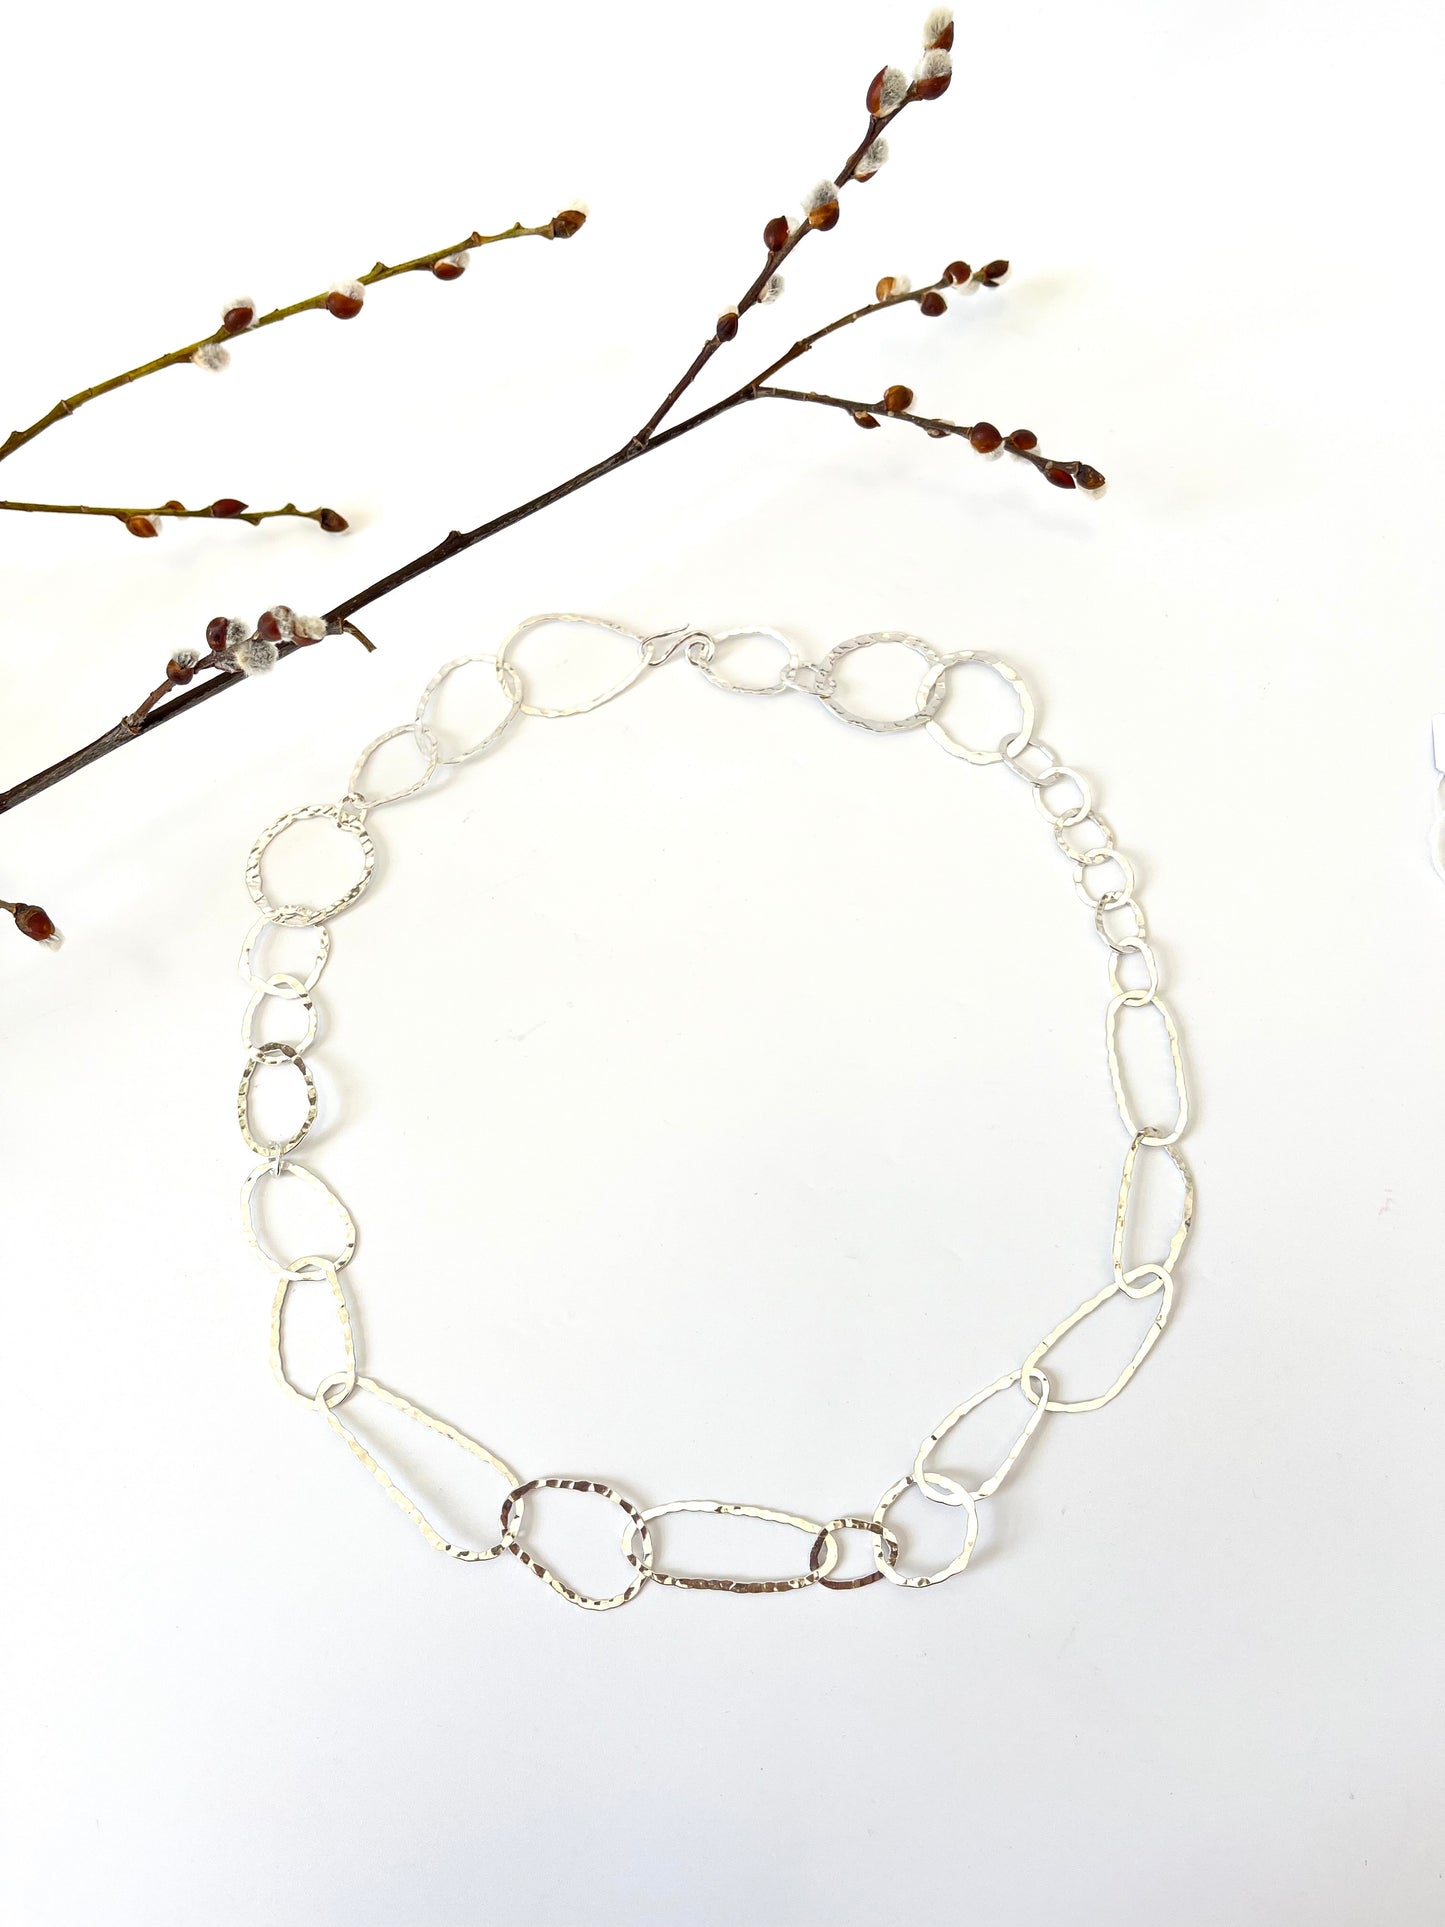 Smooth Oval Link Chain Necklace in Sterling Silver